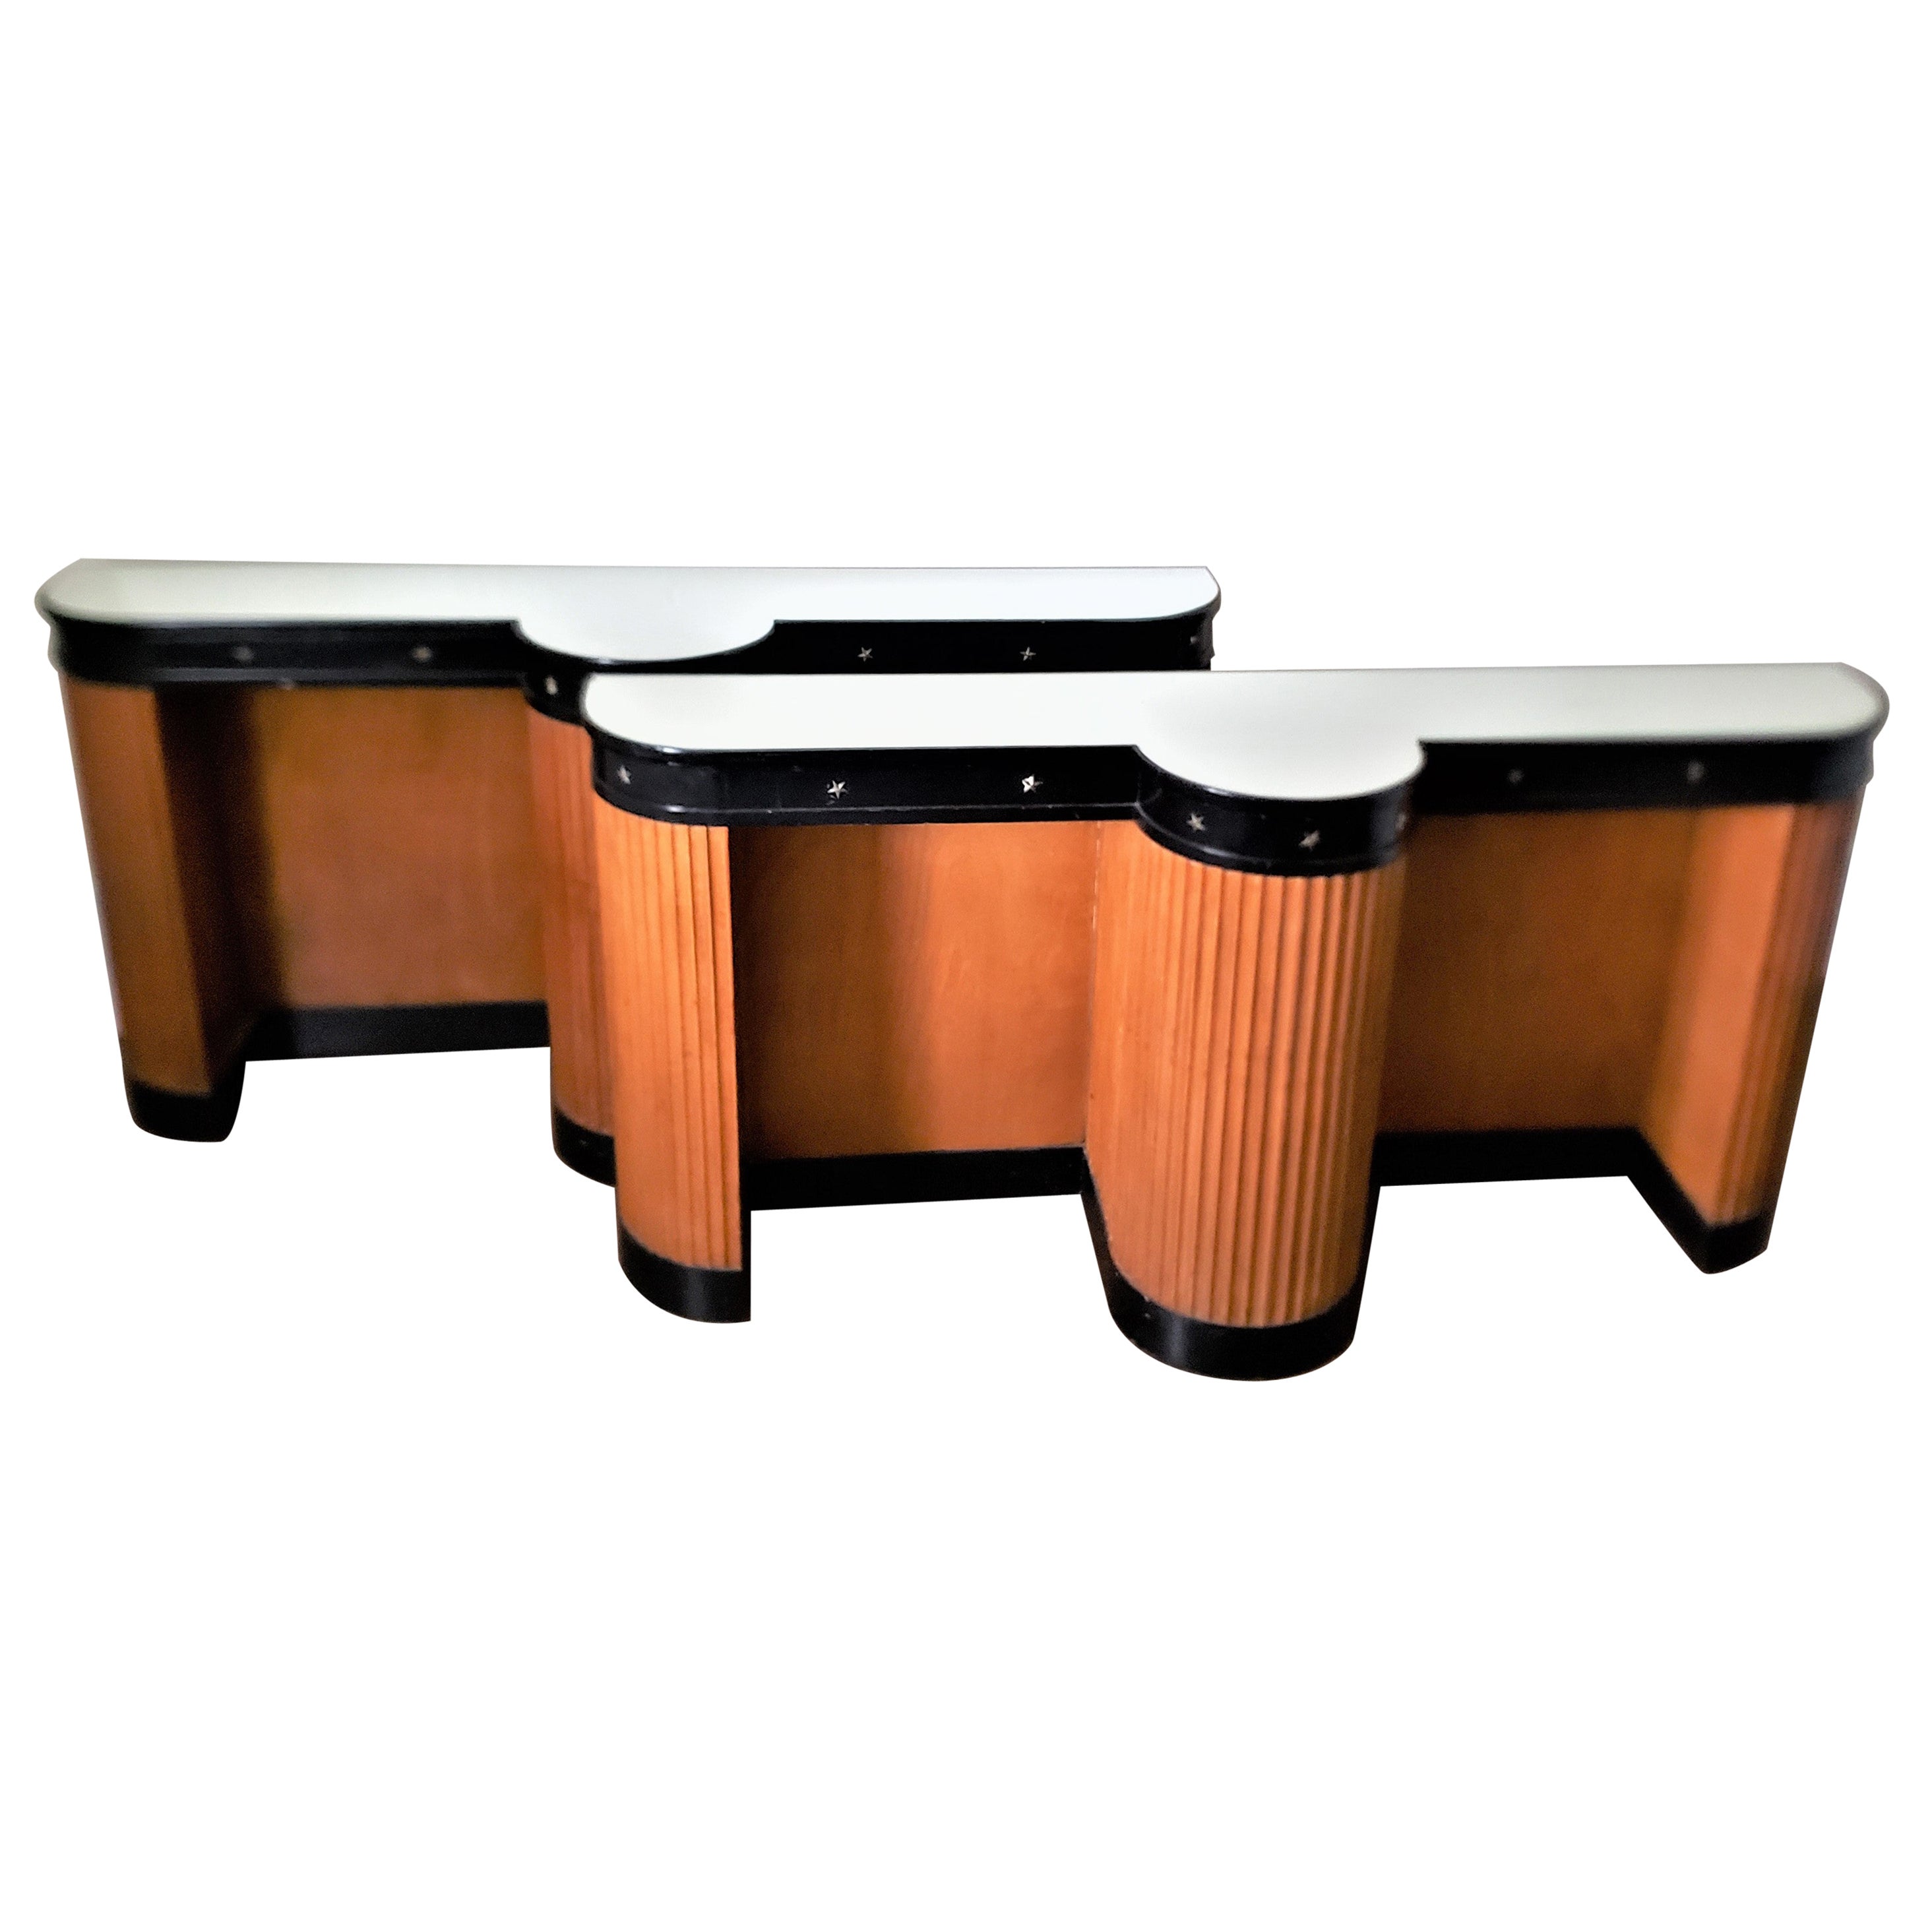 Pair of Art Deco Column Styled Console Tables or Stands with Mirrored Tops